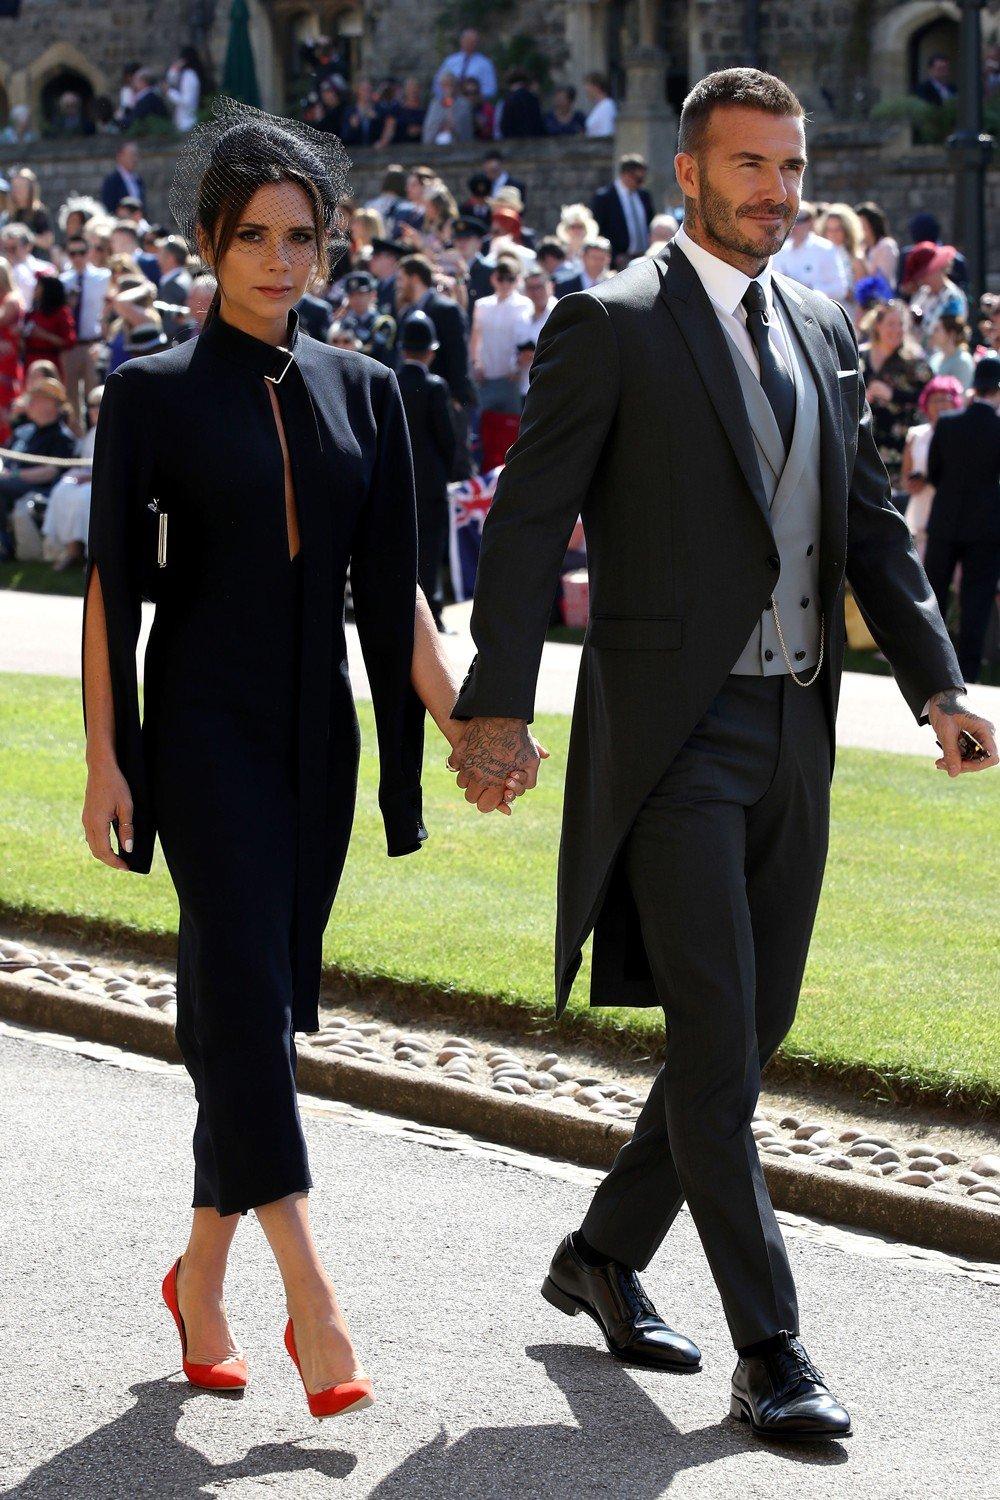 Royal wedding best dressed: Which guests stood out on Meghan